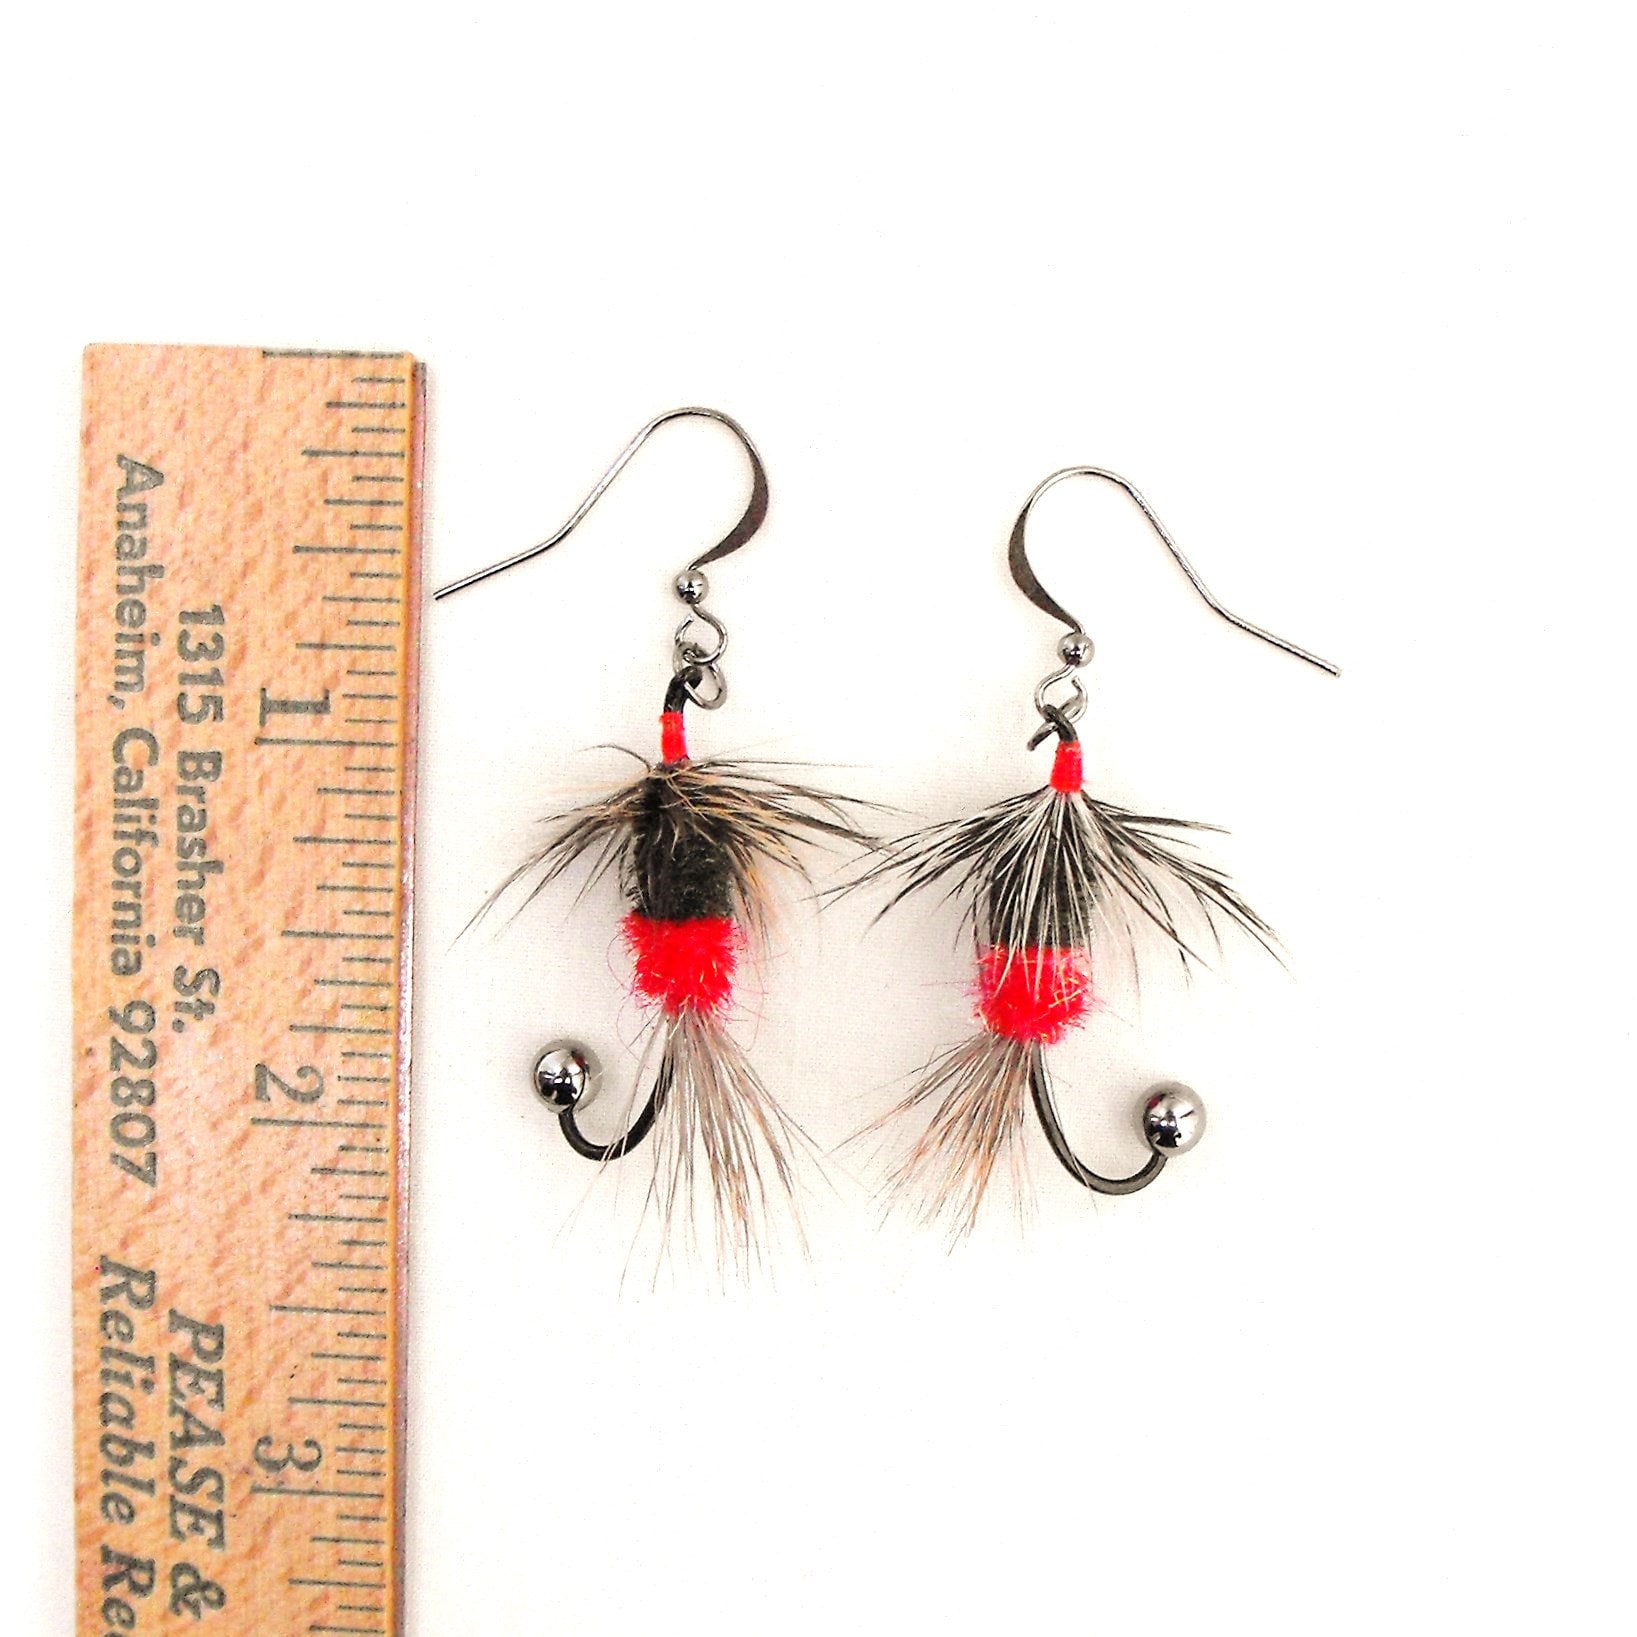 Fly Fisherman Earrings, Red Black and Tan Feather Jewelry Gift for